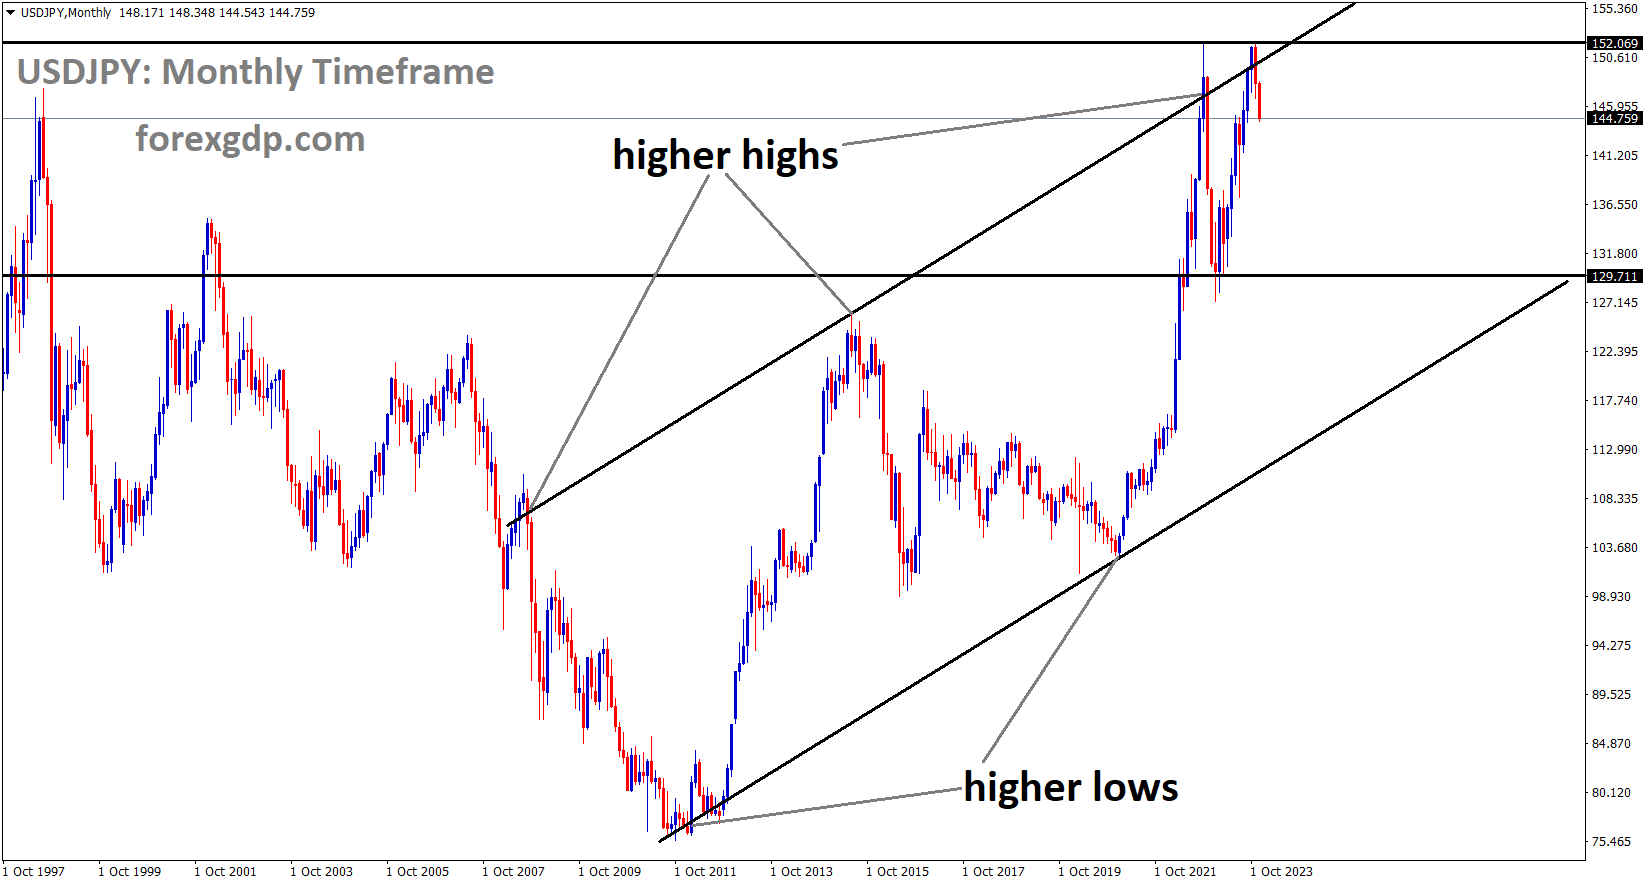 USDJPY is moving in Ascending channel and market has reached higher high area of the channel